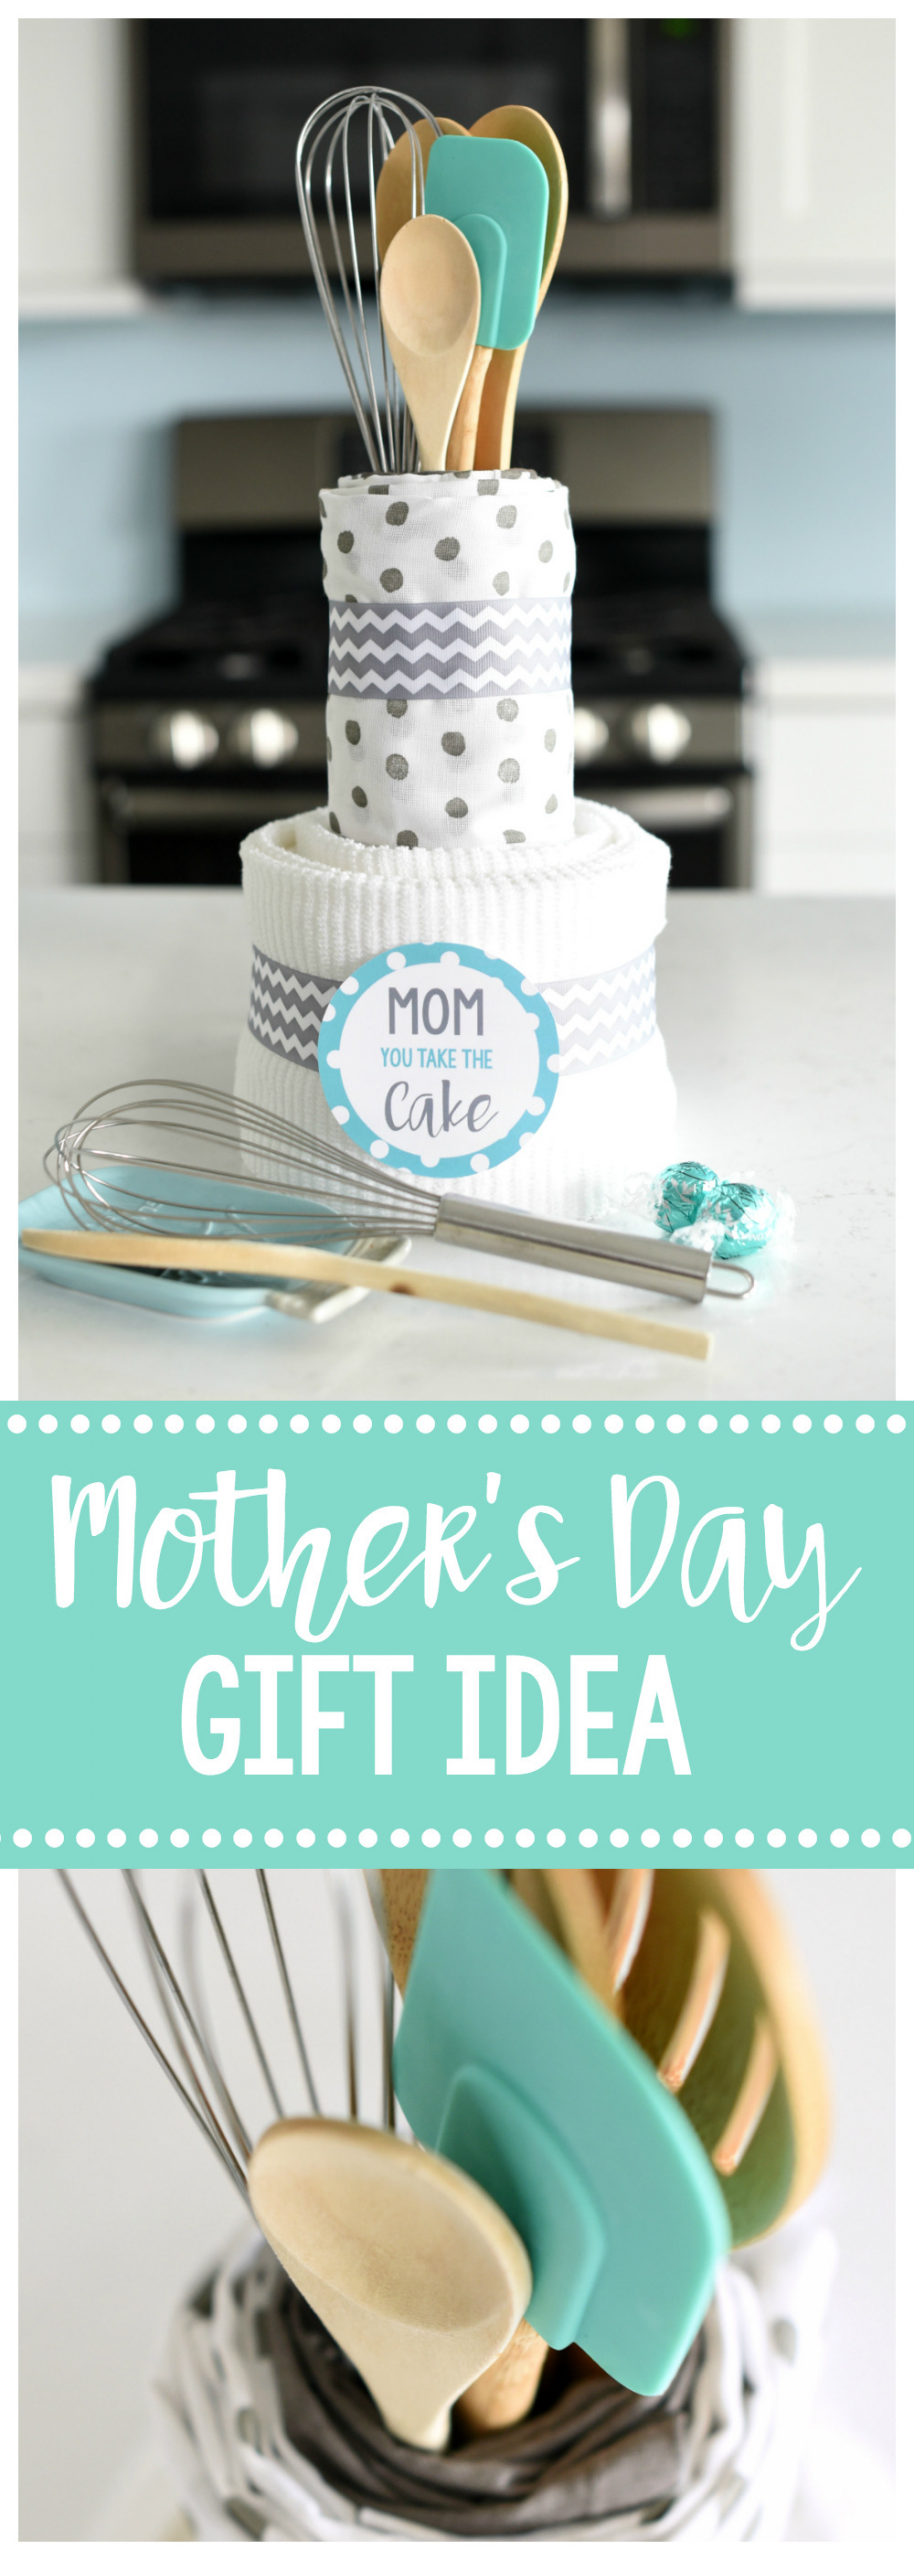 Creative Mother's Day Gifts
 Creative Mother s Day Gifts for Moms Who Love to Cook